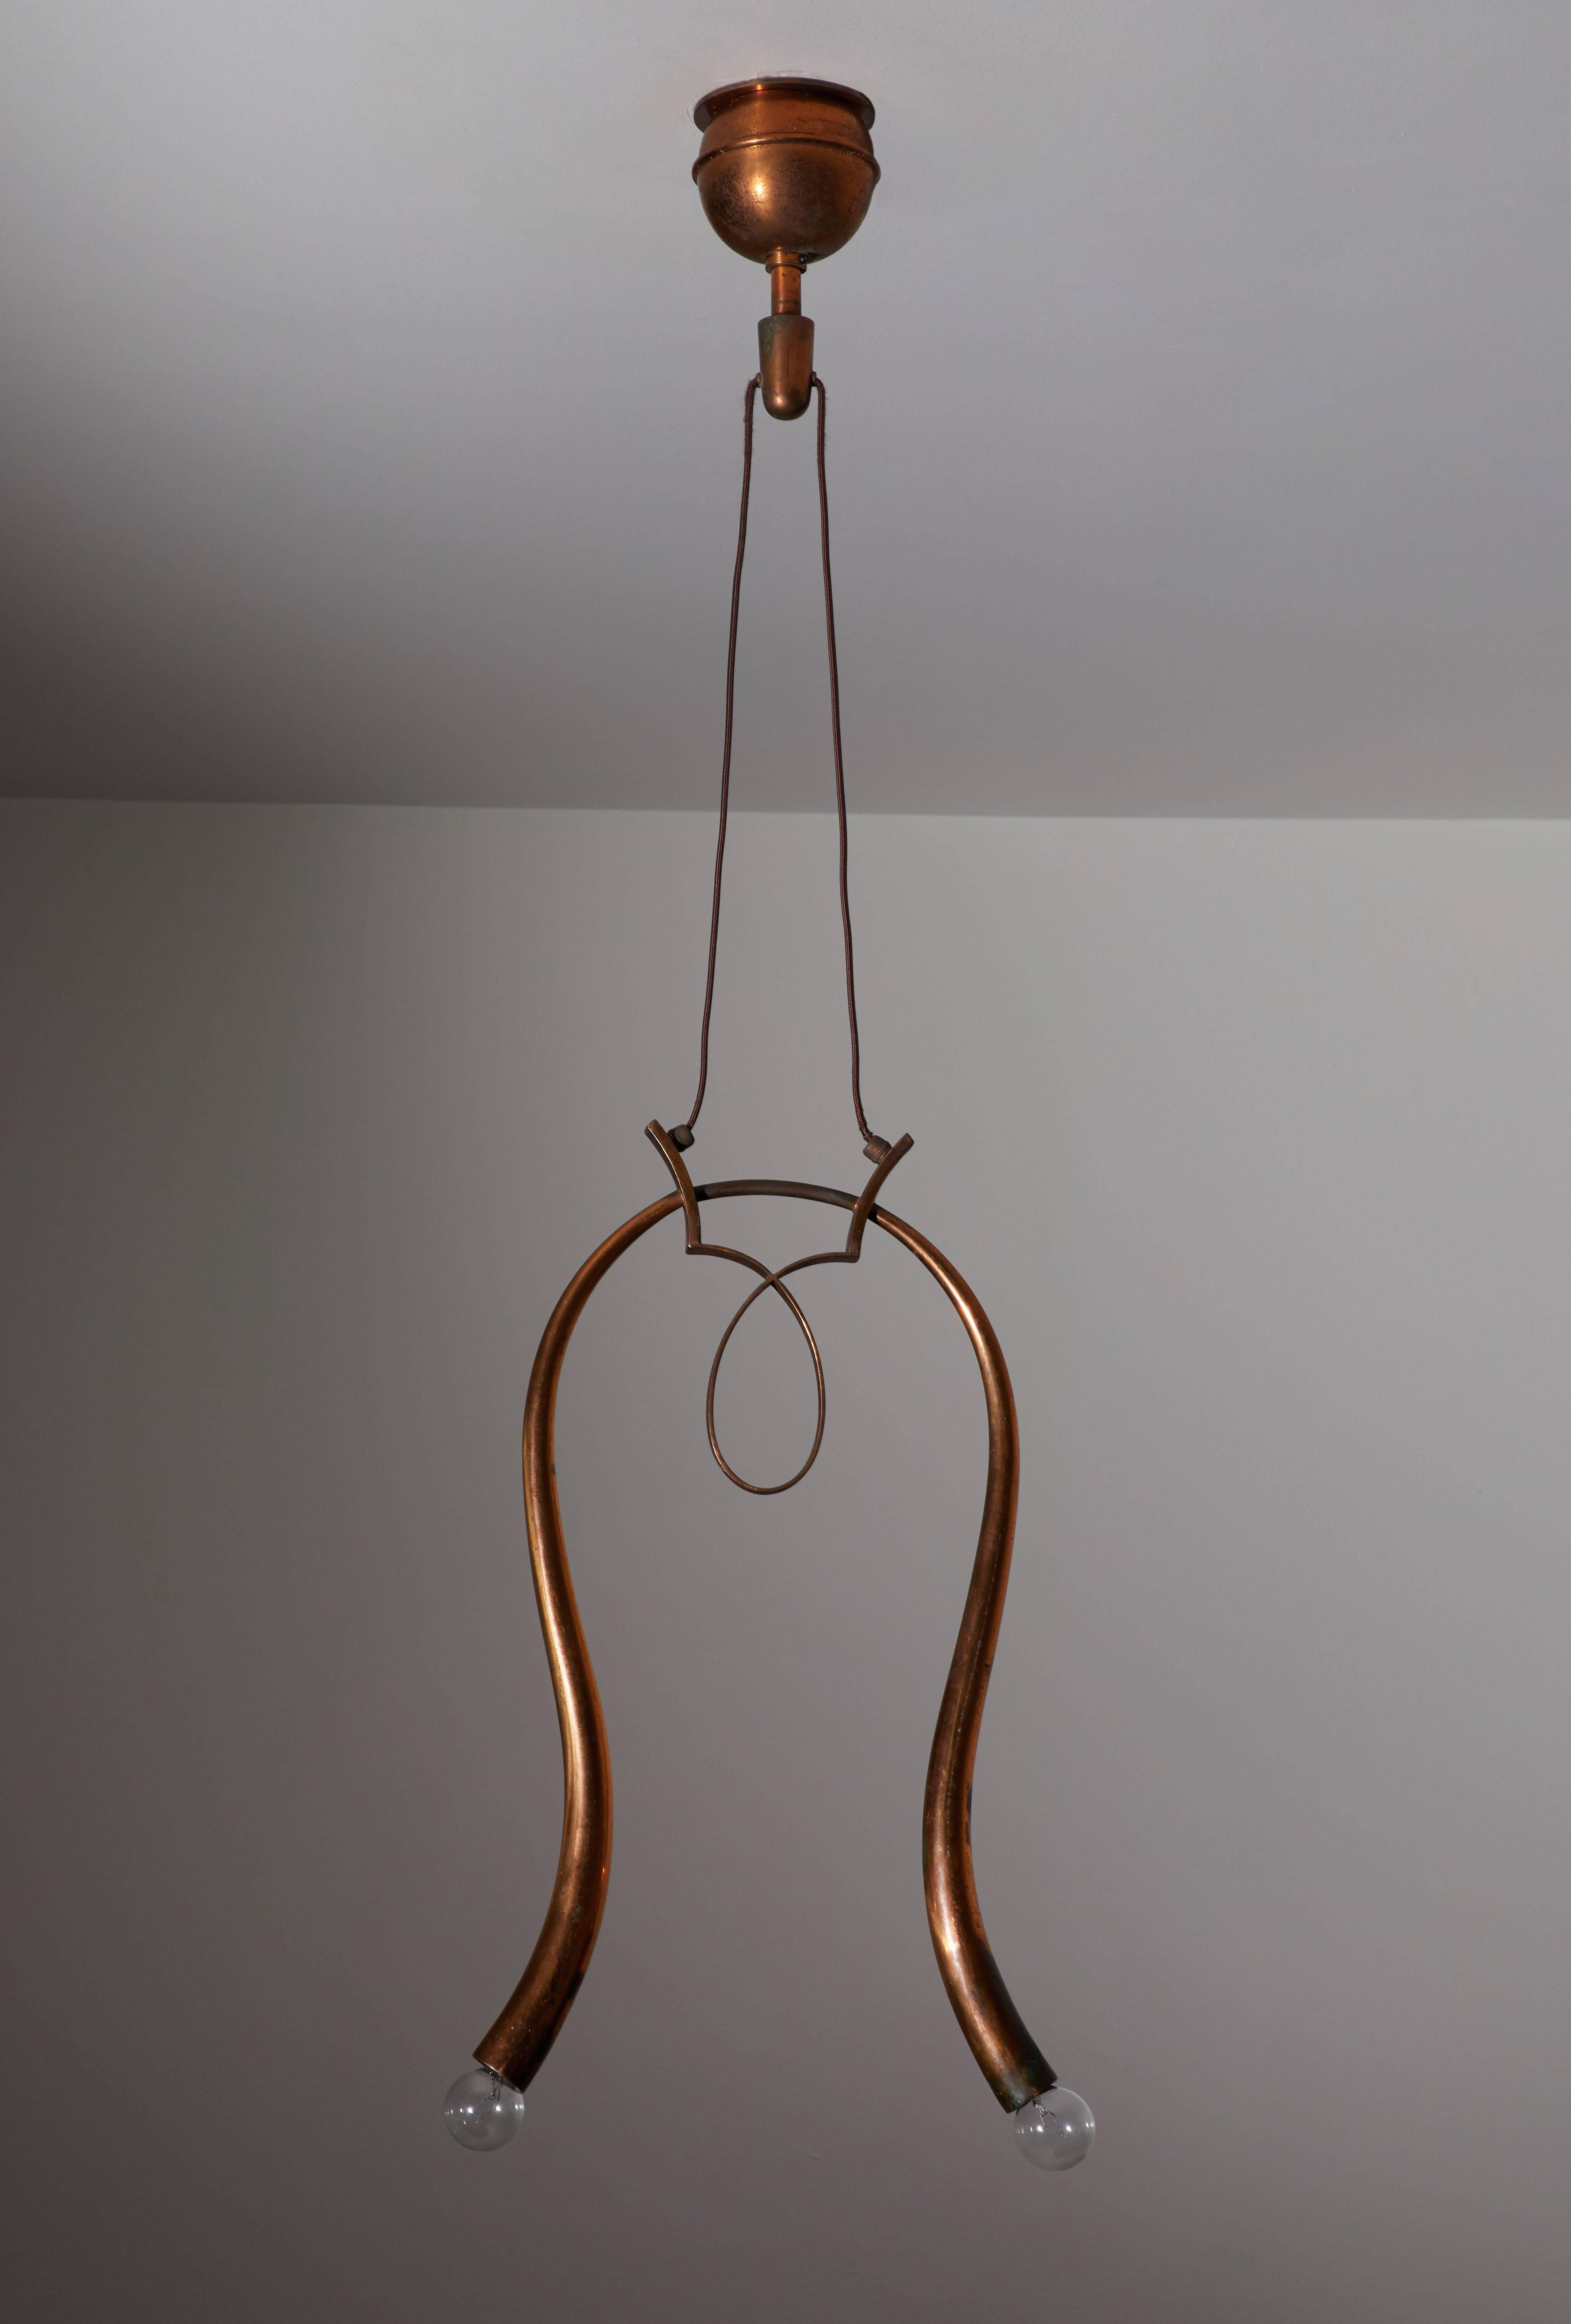 Elegant pendant designed in Italy, circa late 1930s-early 1940s. Brass with an exquisite copper colored patina. Wired for US junction boxes. Overall drop can be adjusted. Takes two E-14 60w maximum bulbs.
 